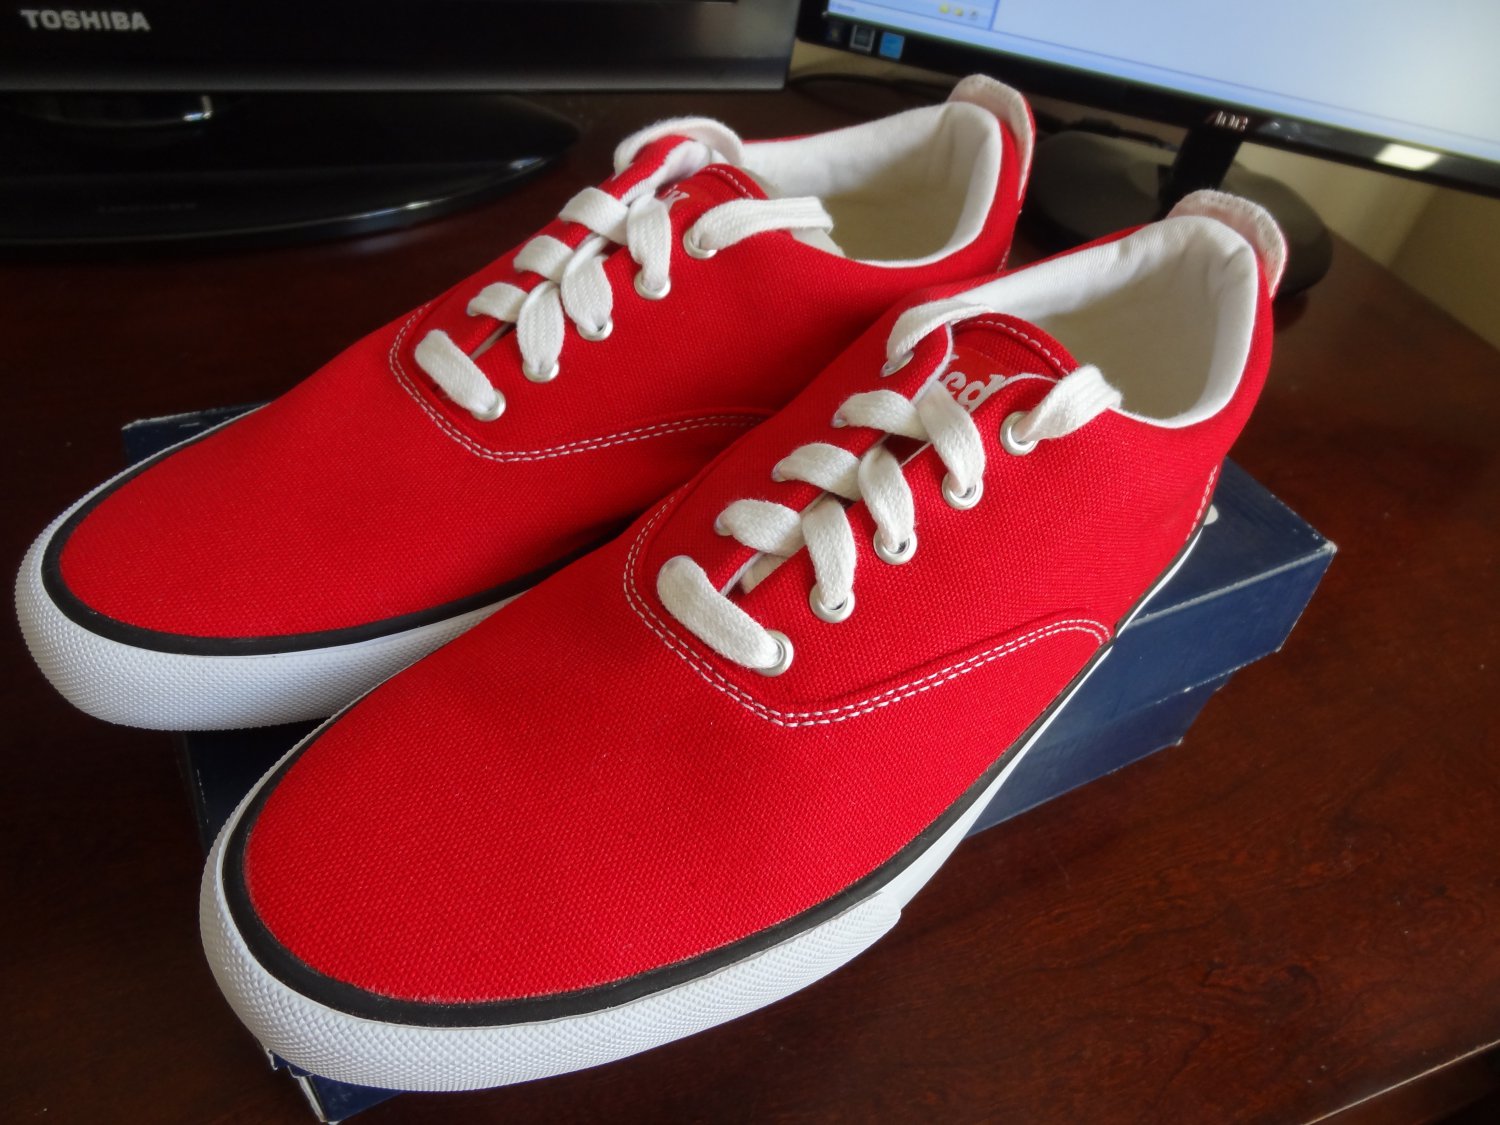 Keds Anchor Canvas Sneakers Red Size 9.5 NEW